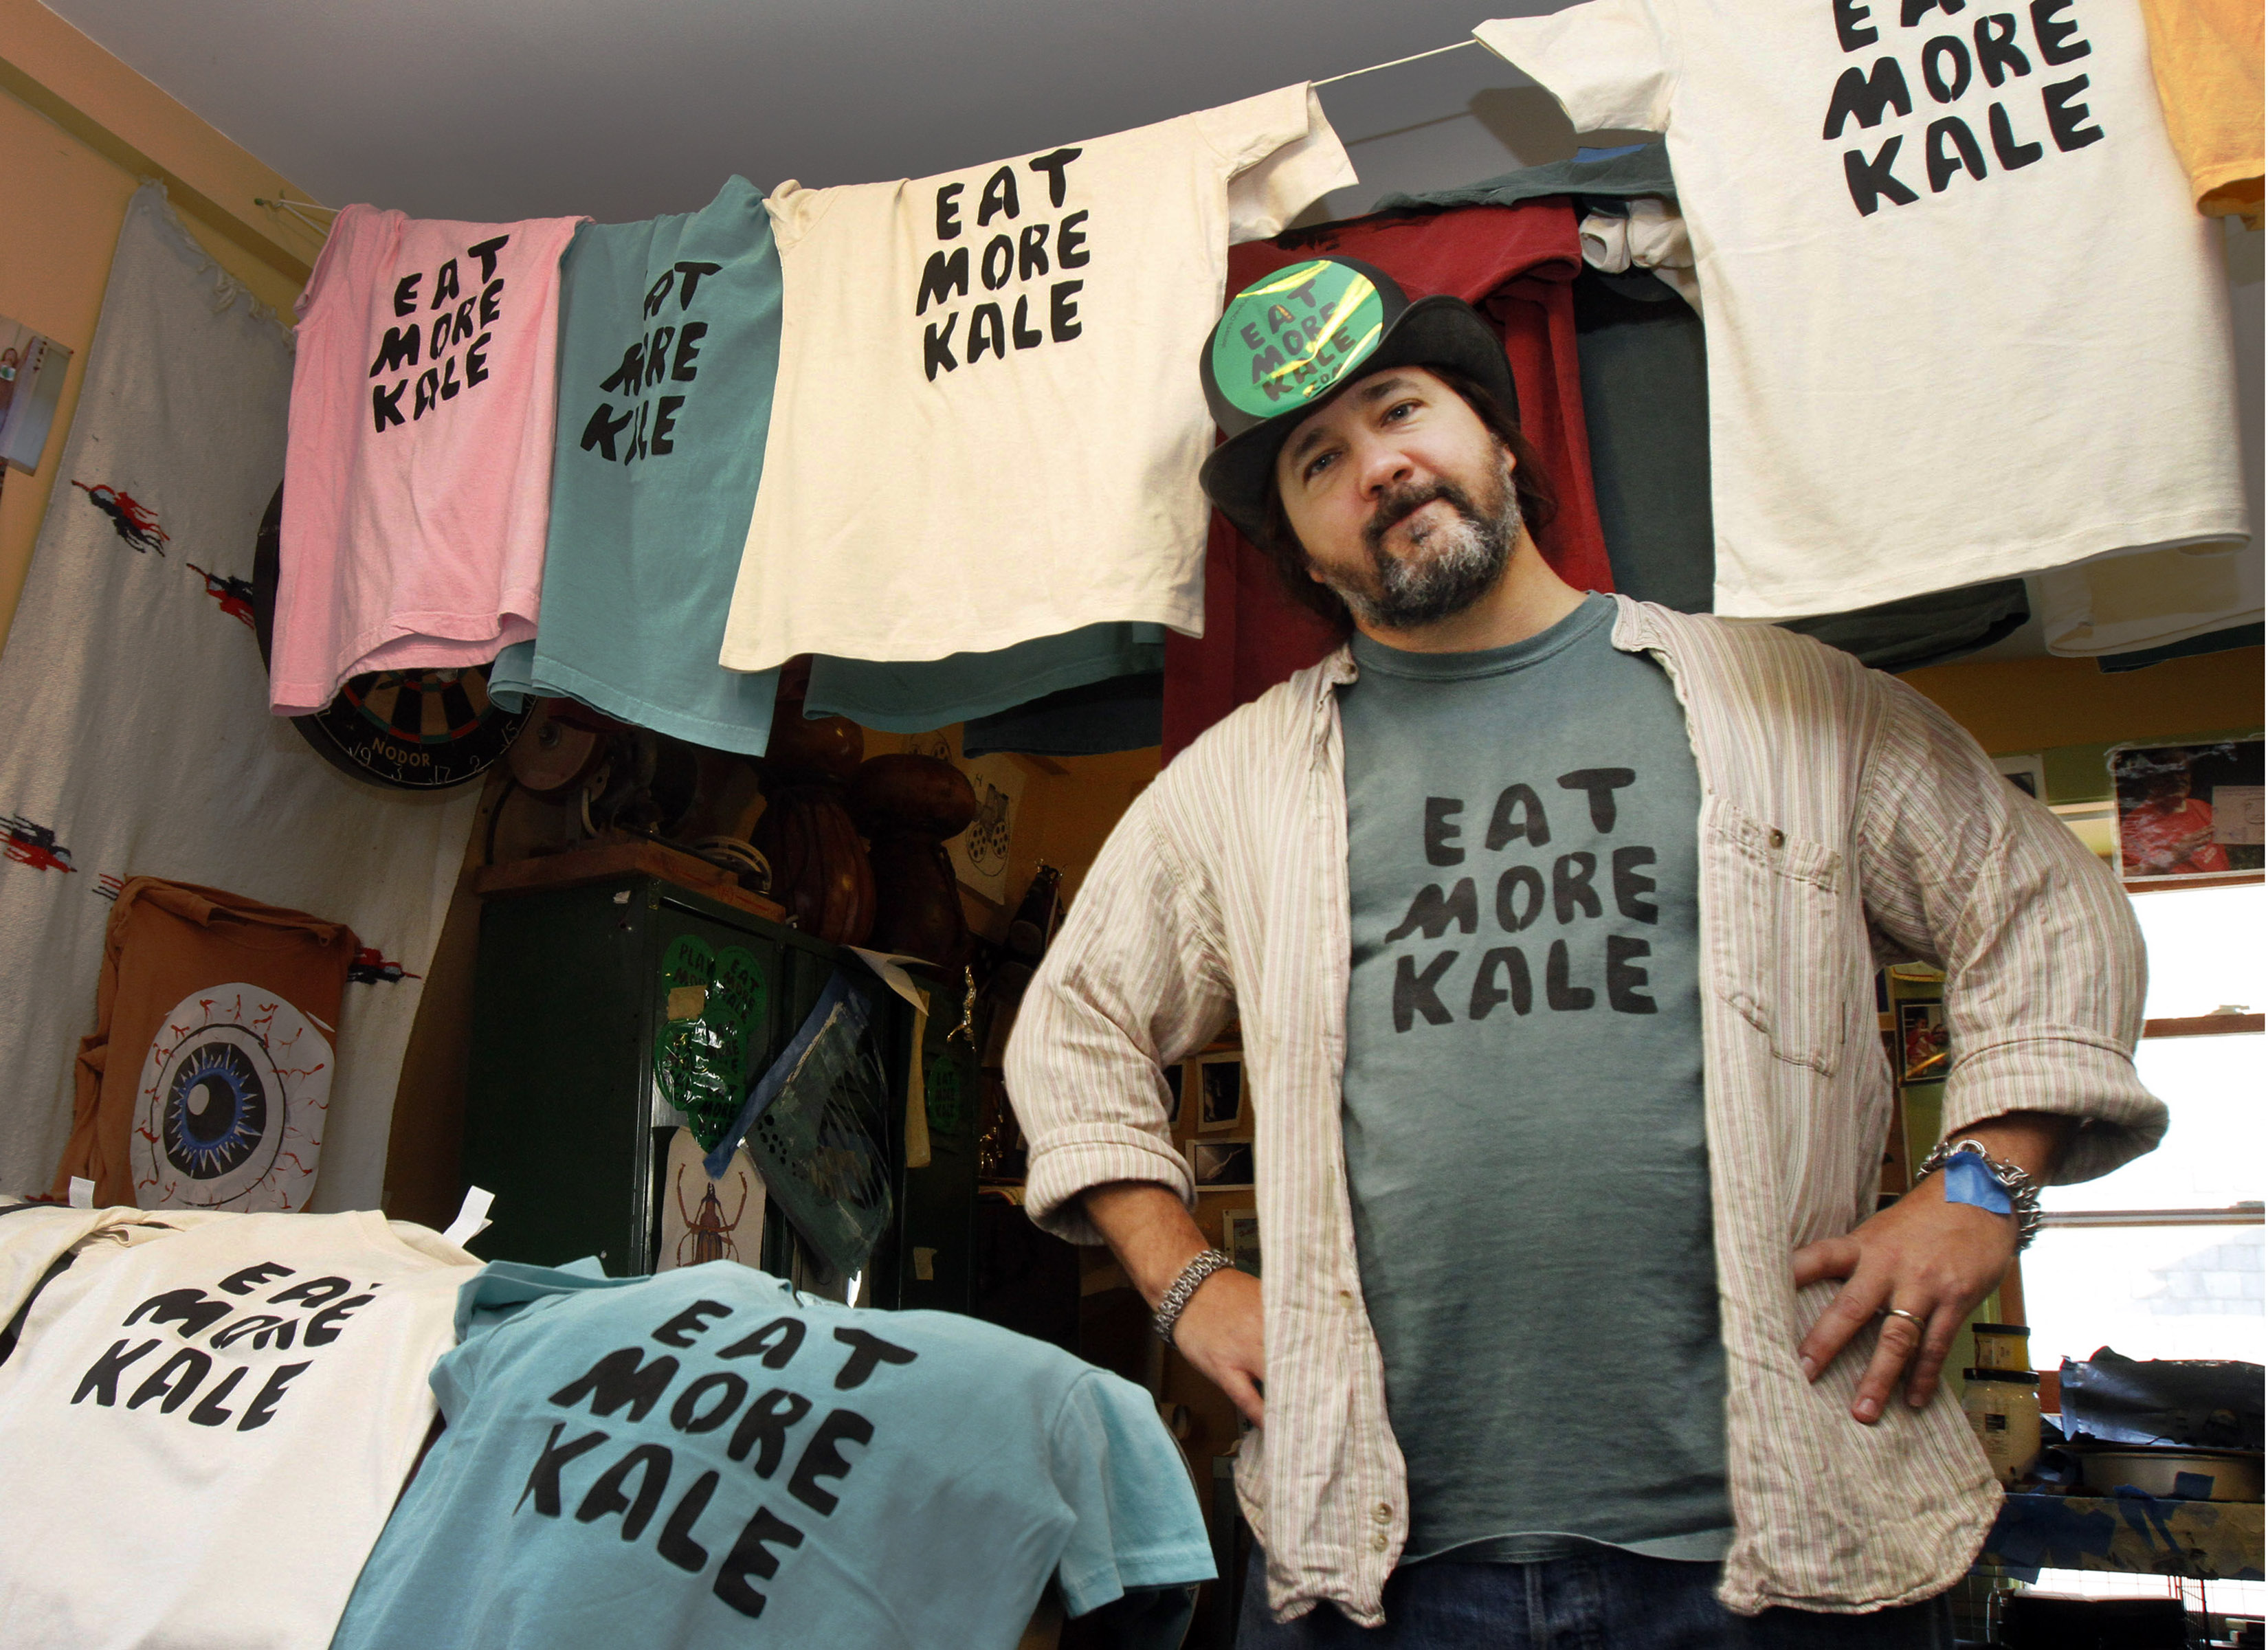 Bo Muller-Moore stands in his home studio in Montpelier, Vt. Muller-Moore, the Vermont man who is building a business around the term "eat more kale," which has been plastered on T-shirts, bumper stickers and other items, is running into opposition from the second largest fried chicken retailer in the country, Chick-fil-A, on Nov. 22, 2011.